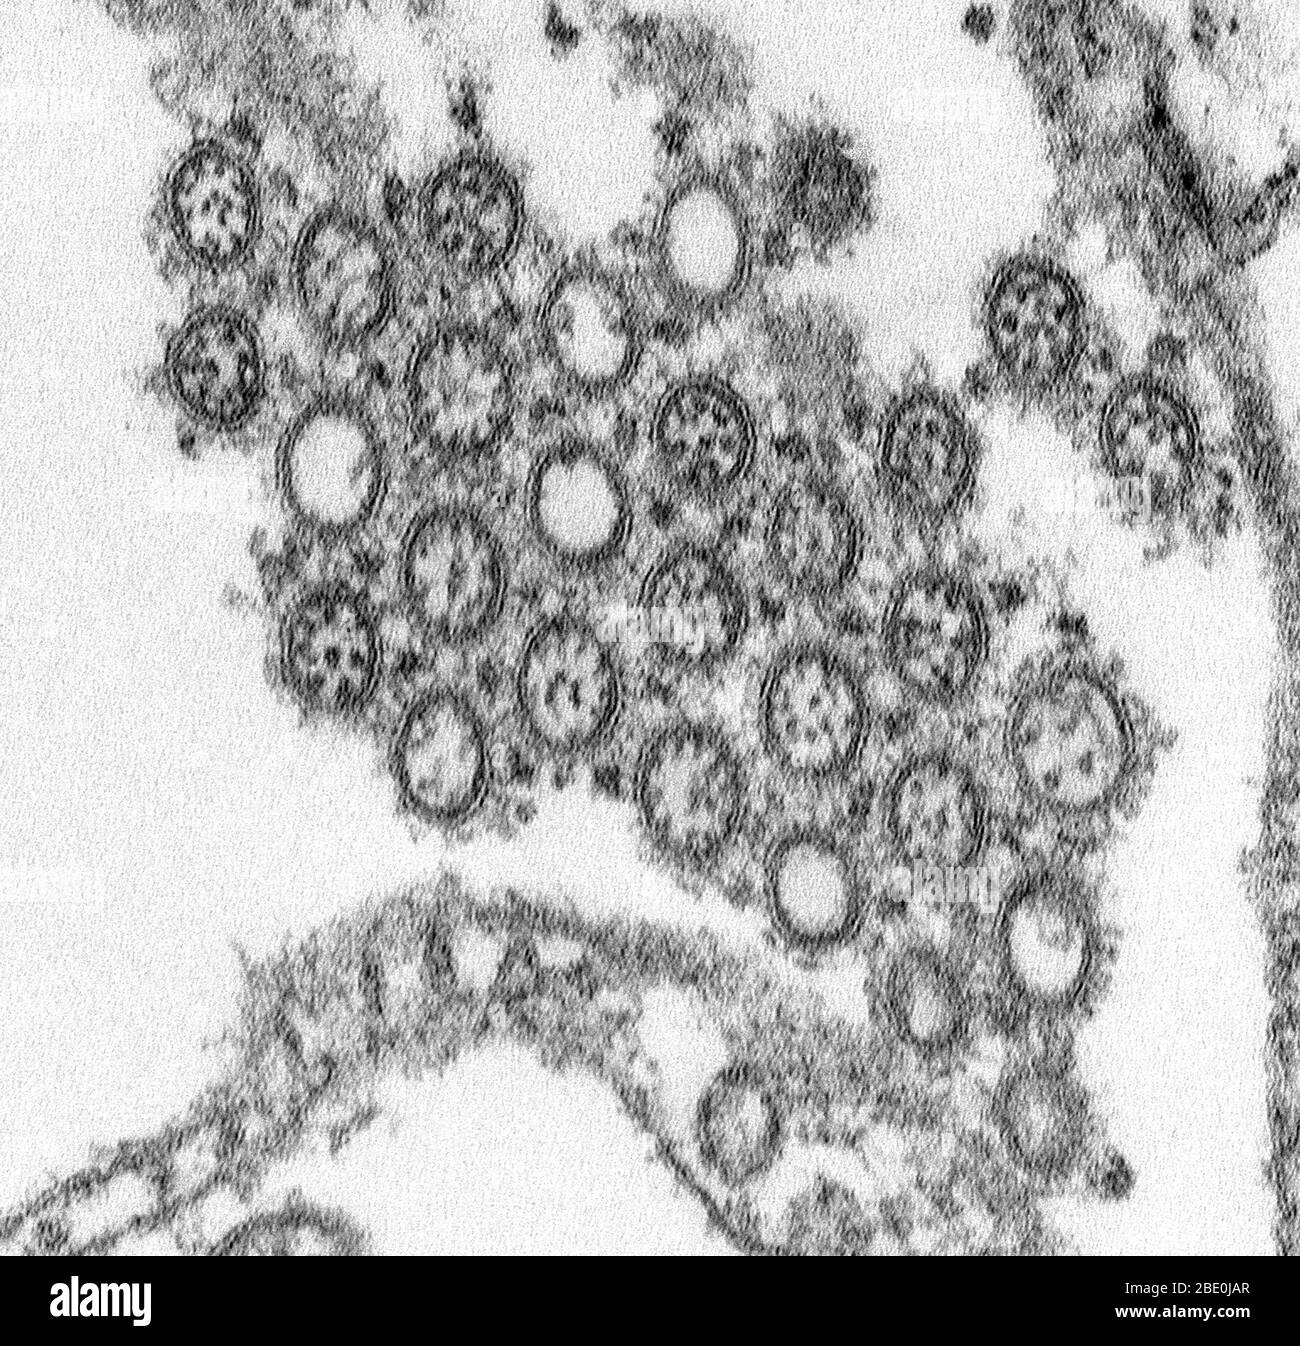 Transmission Electron Micrograph (TEM) depicting numbers of virions from a Novel Flu H1N1 isolate. Novel H1N1 (referred to as ''swine flu'' early on) is a new influenza virus causing illness in people. This new virus was first detected in people in the United States in April 2009. This virus is spreading from person-to-person worldwide, probably in much the same way that regular seasonal influenza viruses spread. On June 11, 2009, the World Health Organization (WHO) signaled that a pandemic of novel H1N1 flu was underway. This virus was originally referred to as ''swine flu'' because laborator Stock Photo